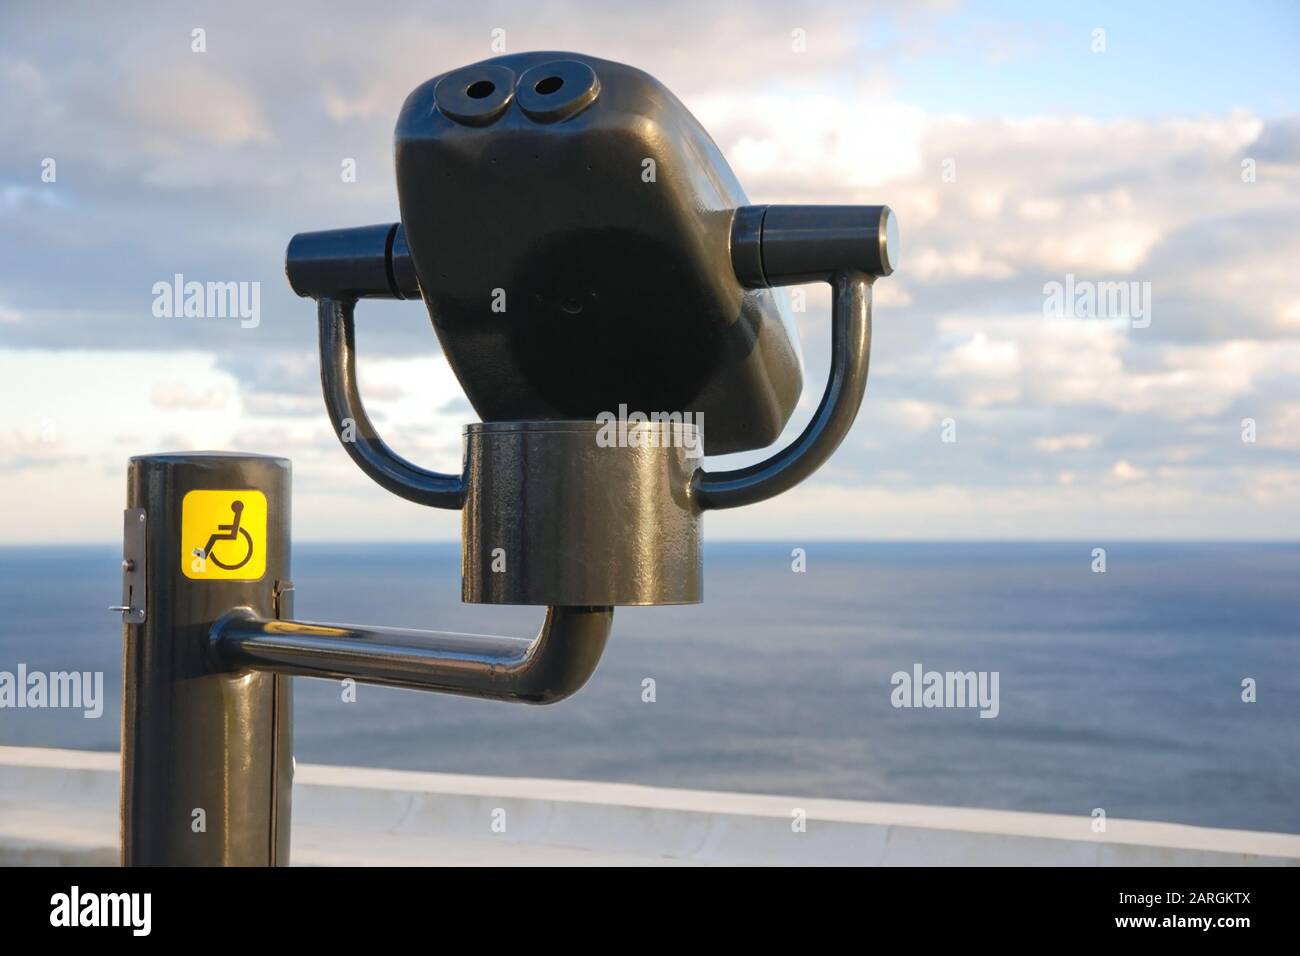 Binocular viewer for disabled tourists. Accessibility, lifestyle and inclusiveness concept. Stock Photo